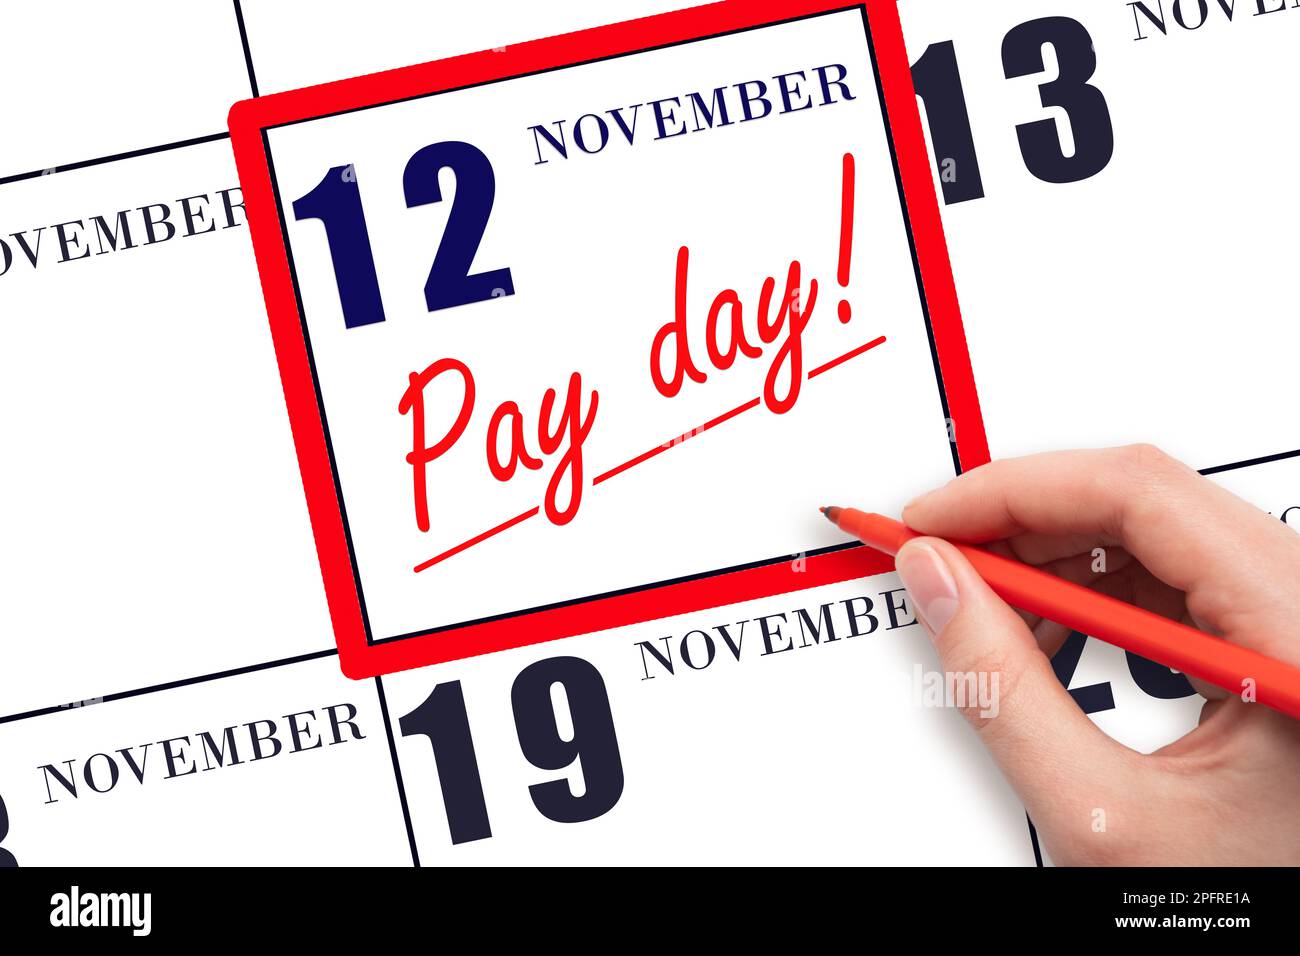 12th day of November. Hand writing text PAY DATE on calendar date November 12 and underline it. Payment due date.  Reminder concept of payment. Autumn Stock Photo